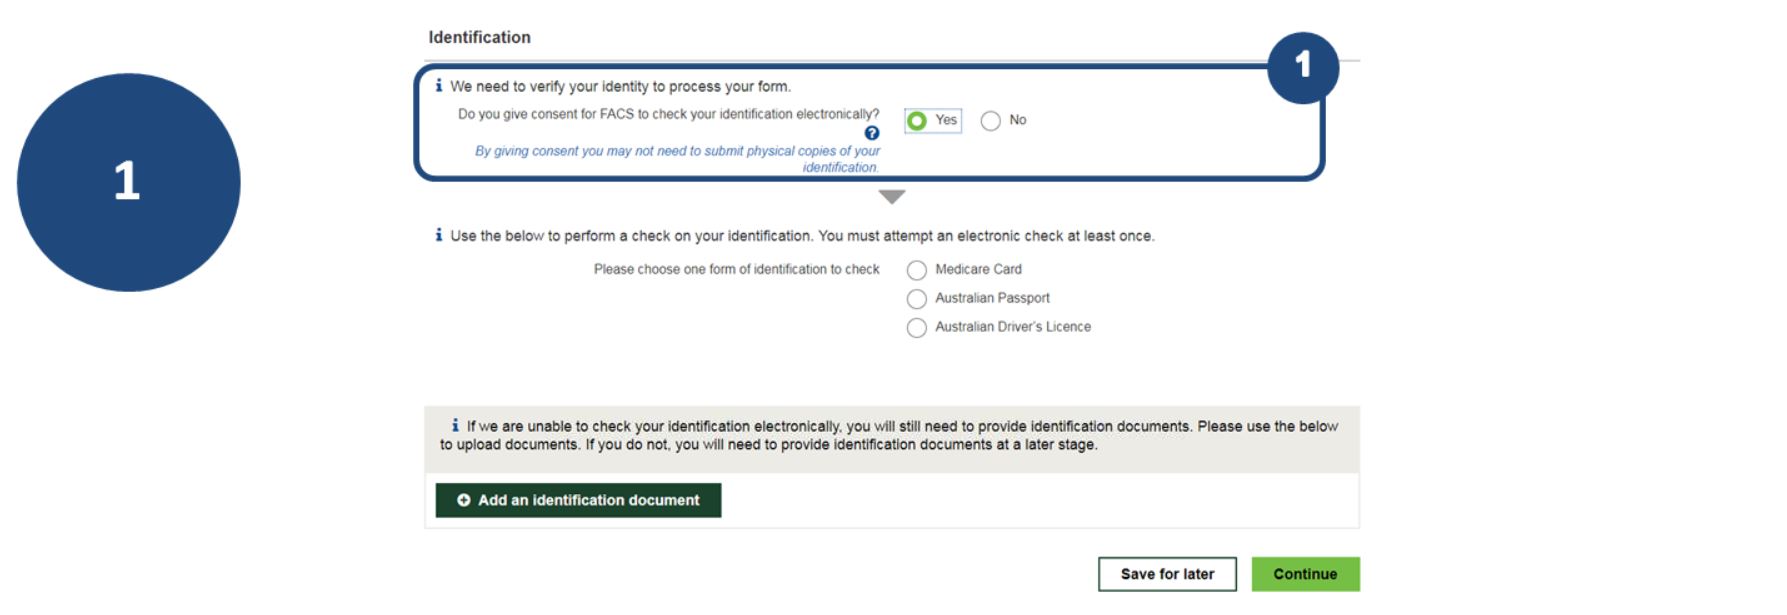 1.Click “Yes” to consent for FACS to check your identification electronically